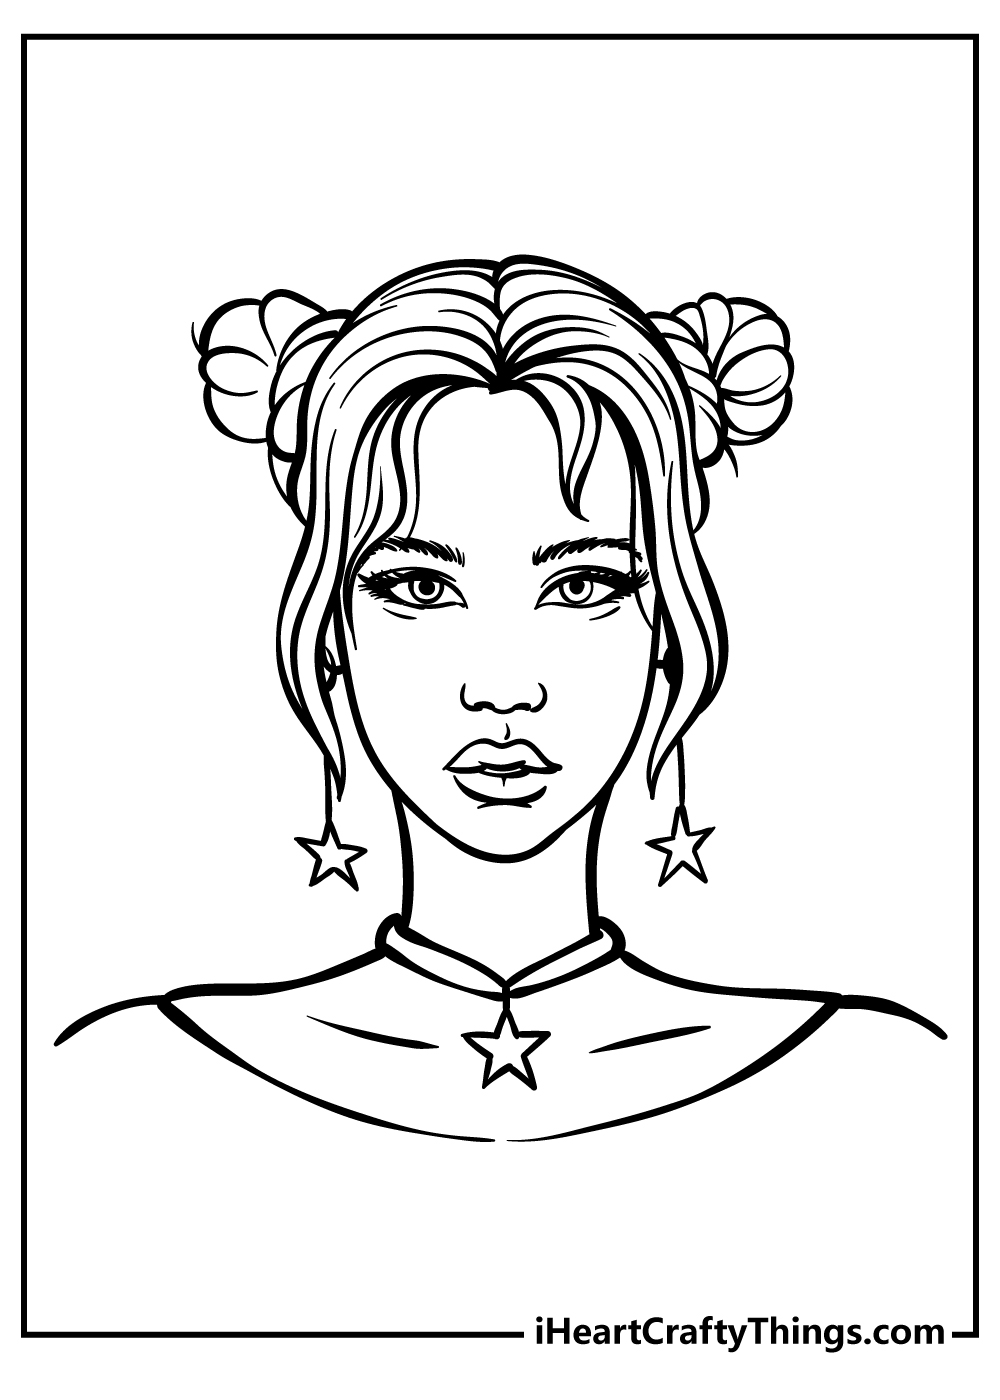 Printable Coloring Pages For Teens Updated 20